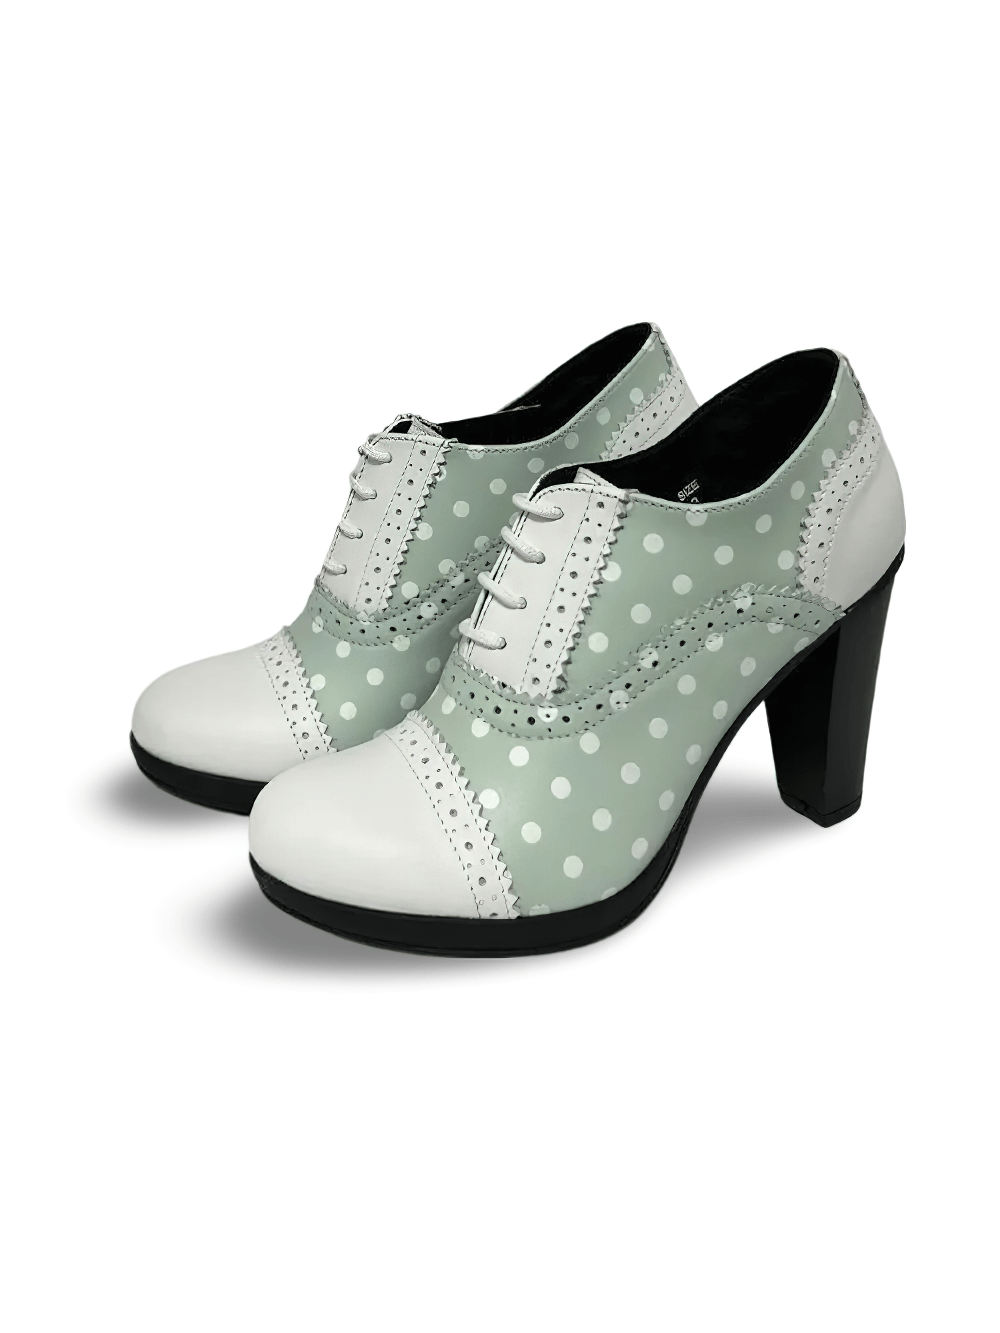 Mint And White Polka Dot Lace-Up Shoes With Microfiber Lined